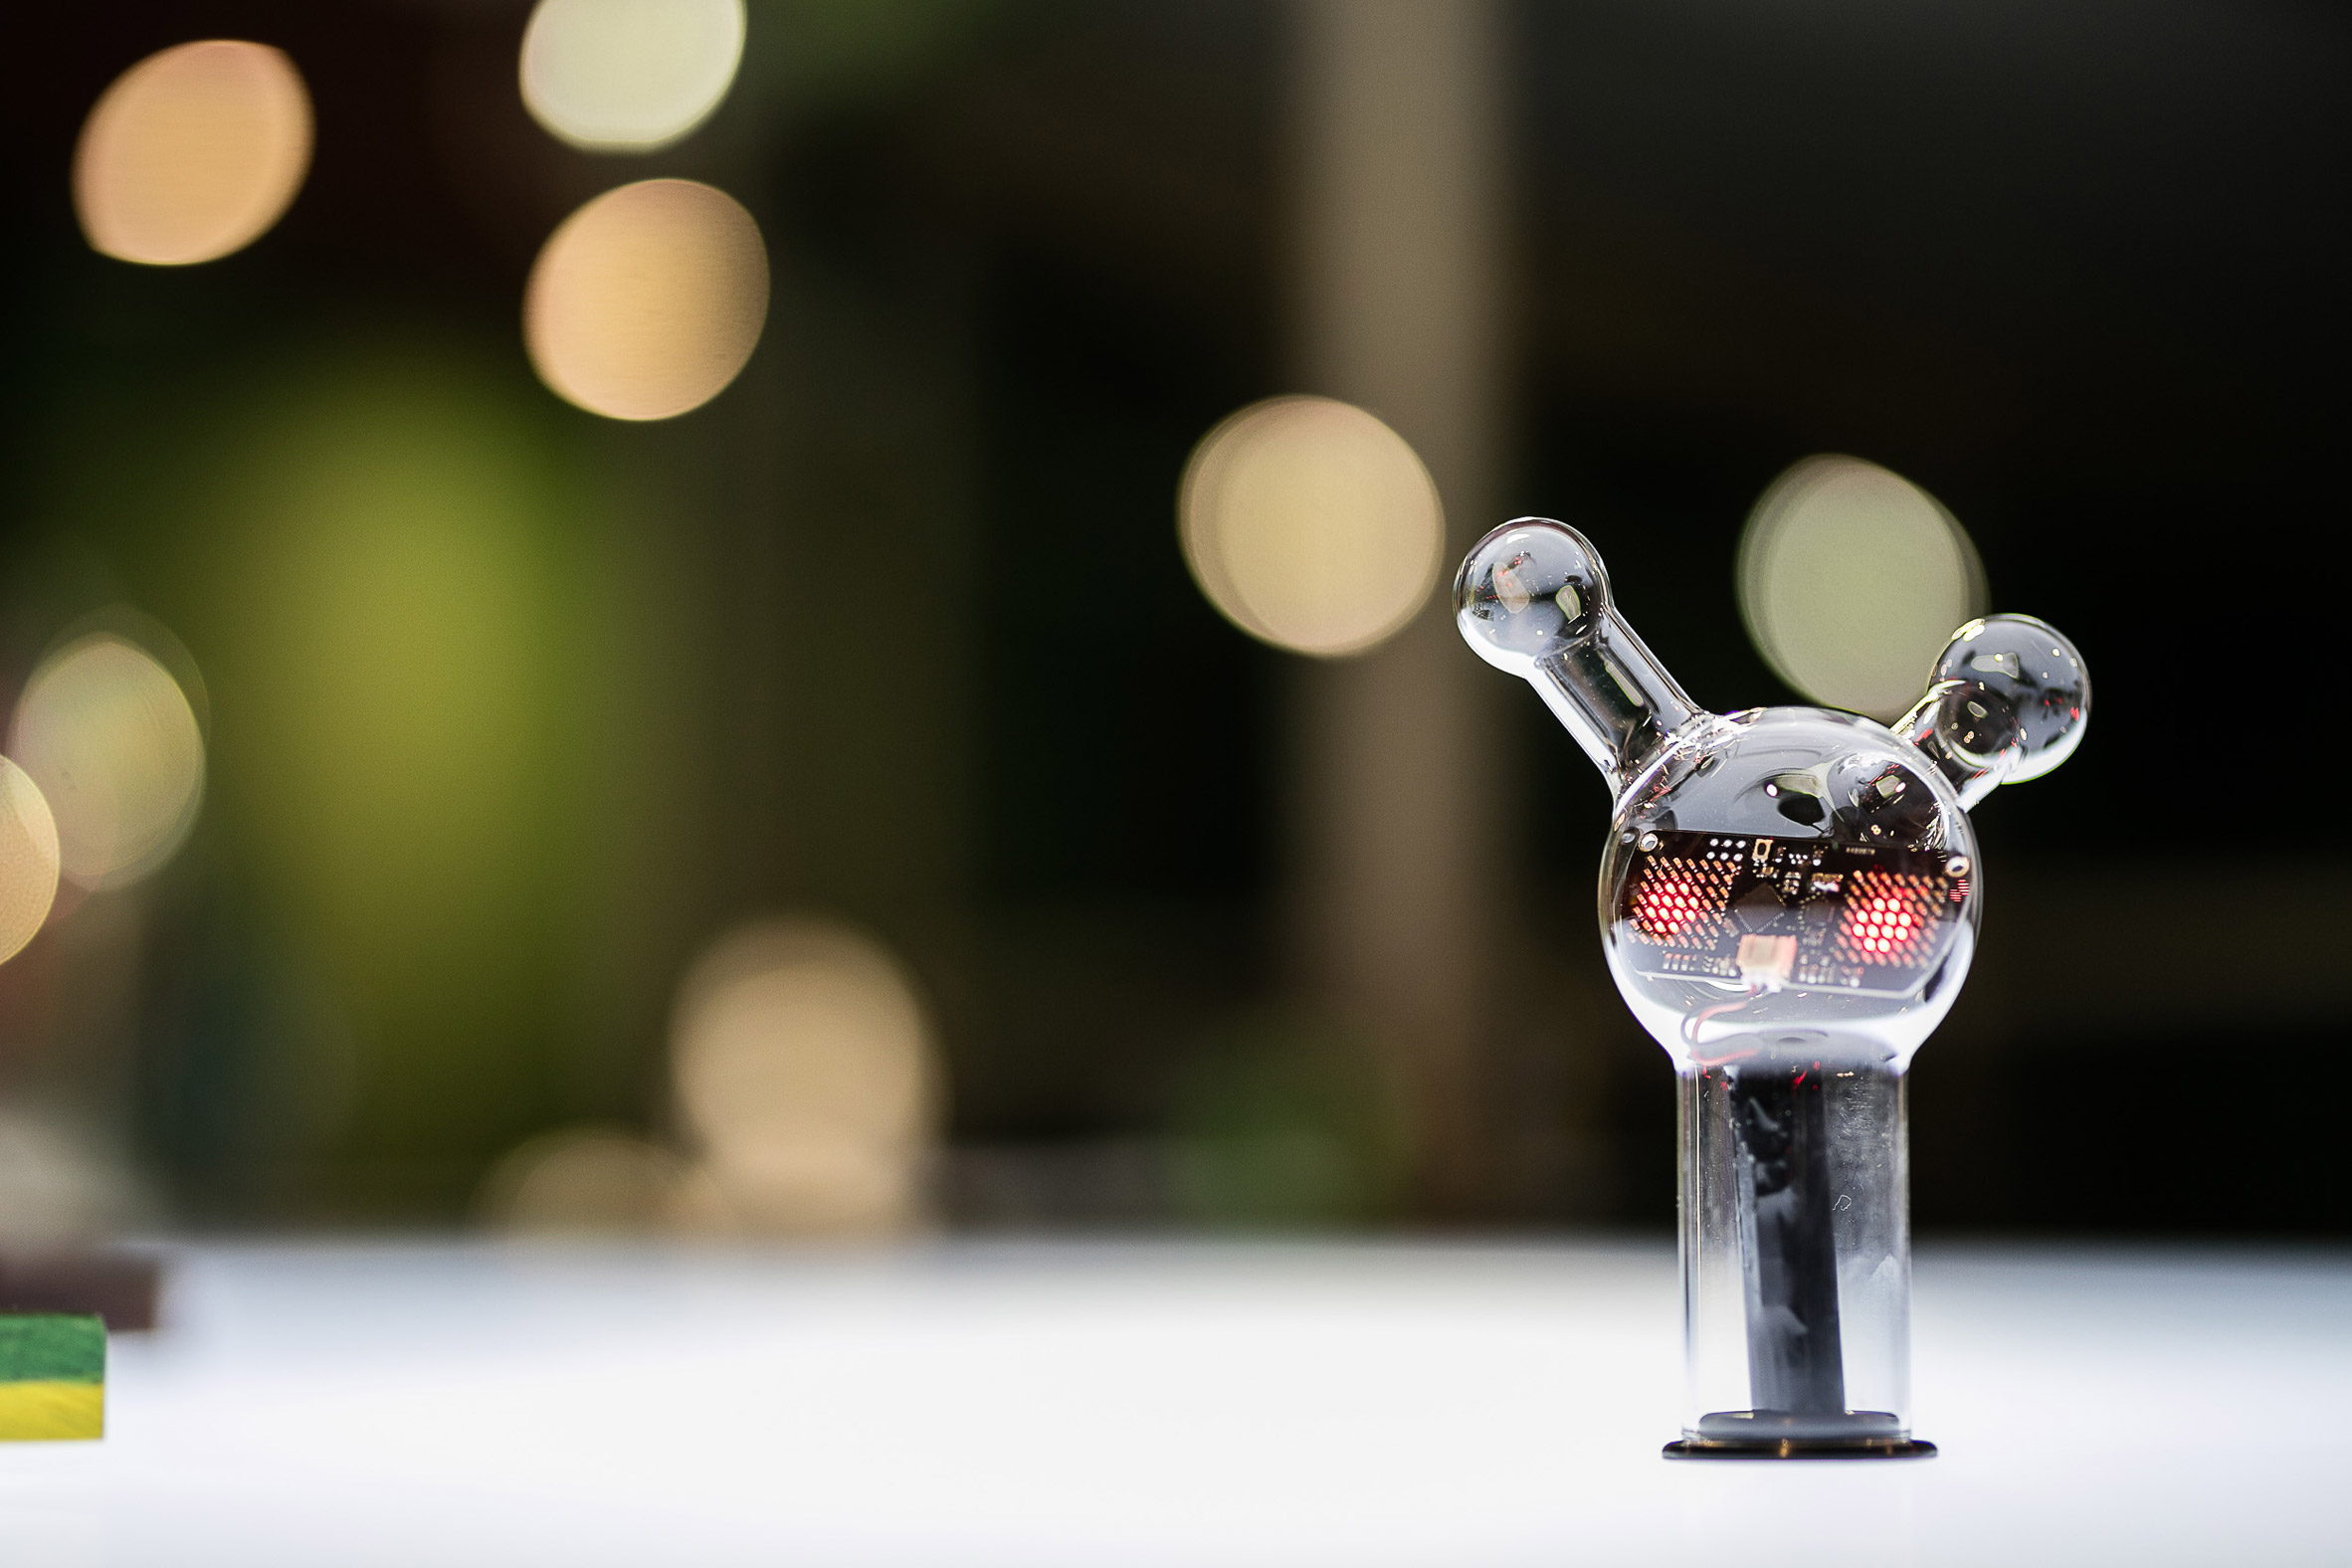 Glass monsters invade Milanese theatre for Lasvit's Monster Cabaret exhibition